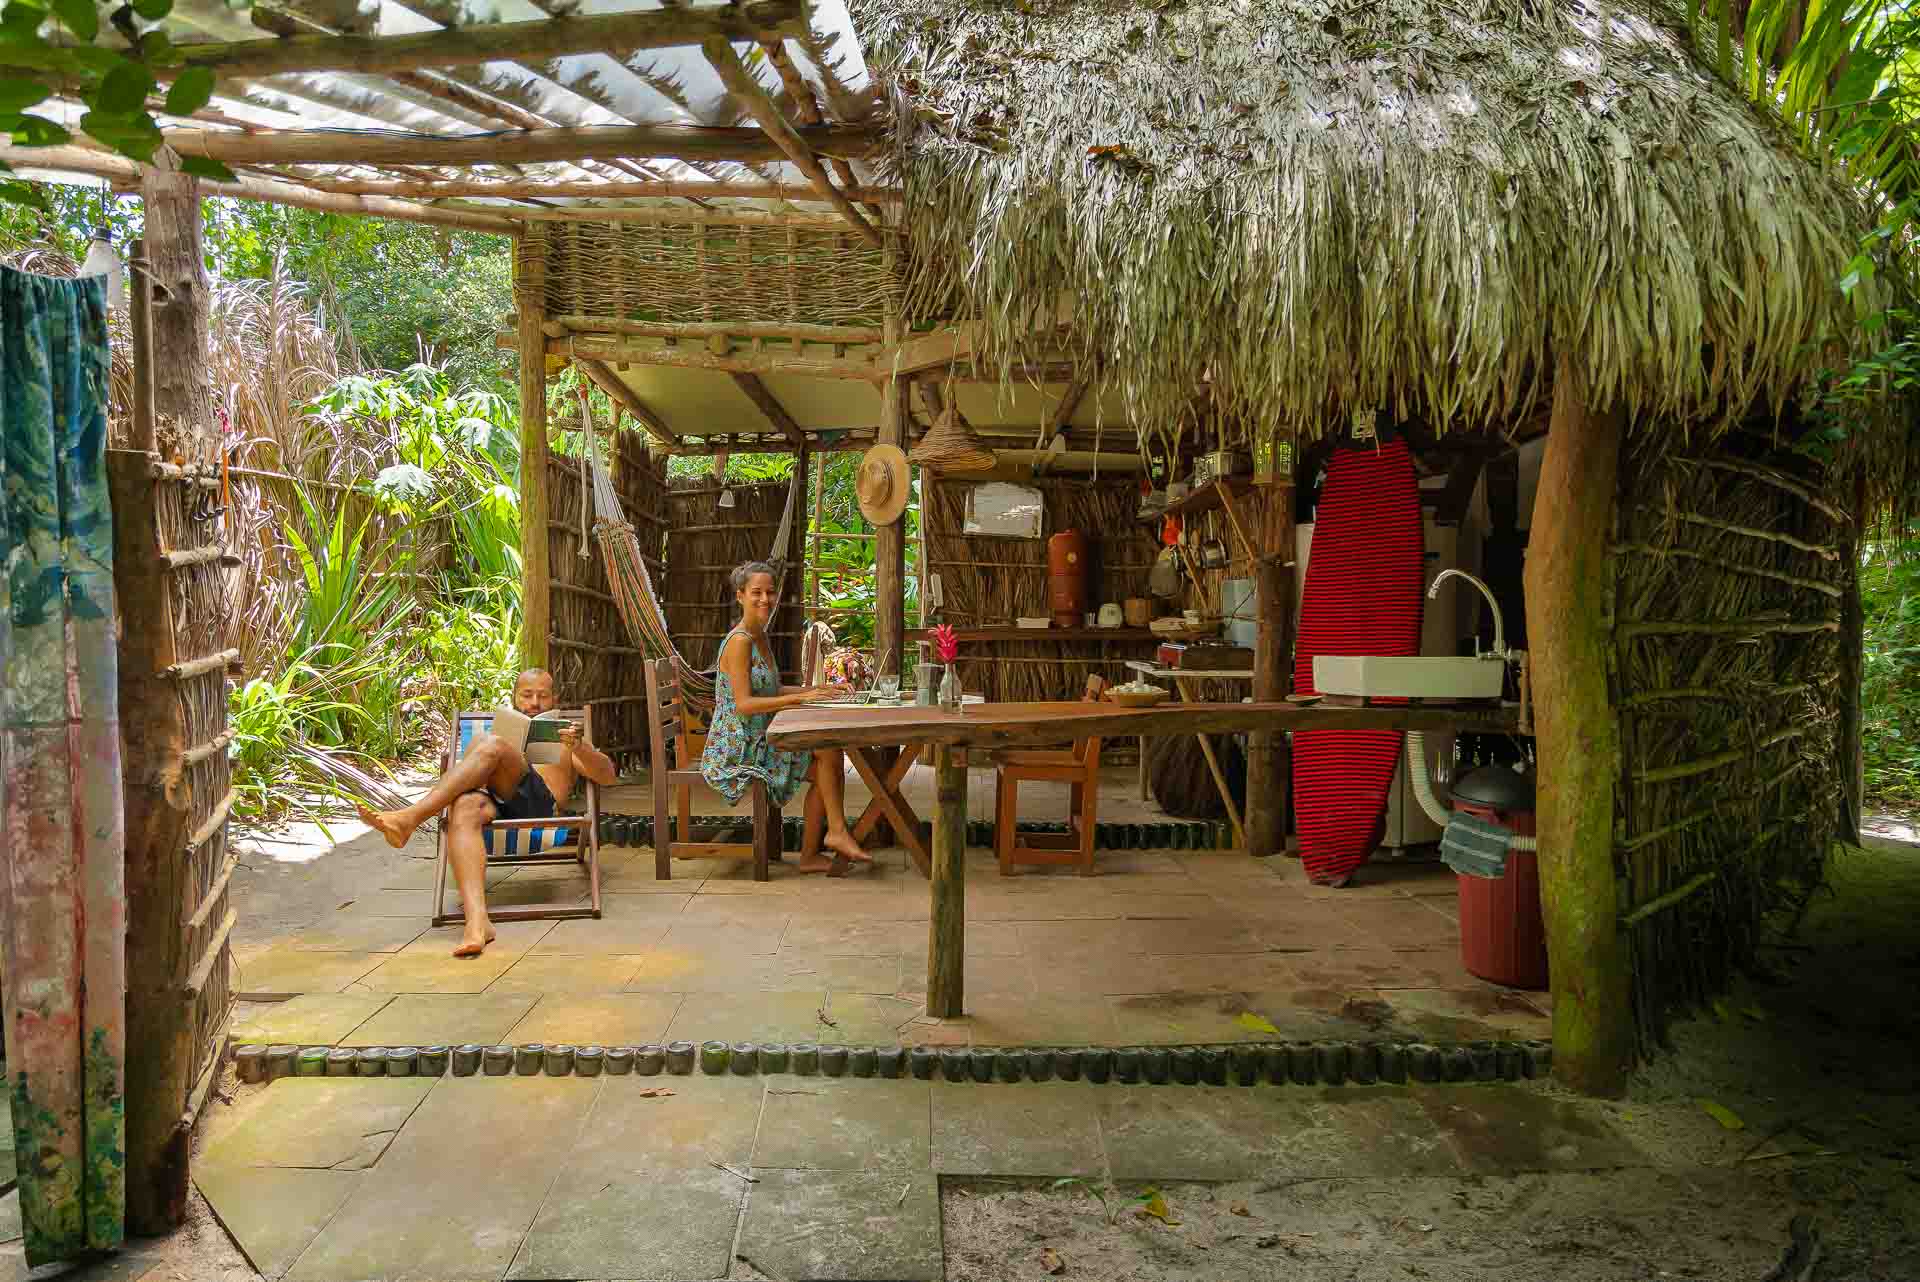 a bungalow in morere made of wood and straw with tiago and fernanda sitting down near a surf board